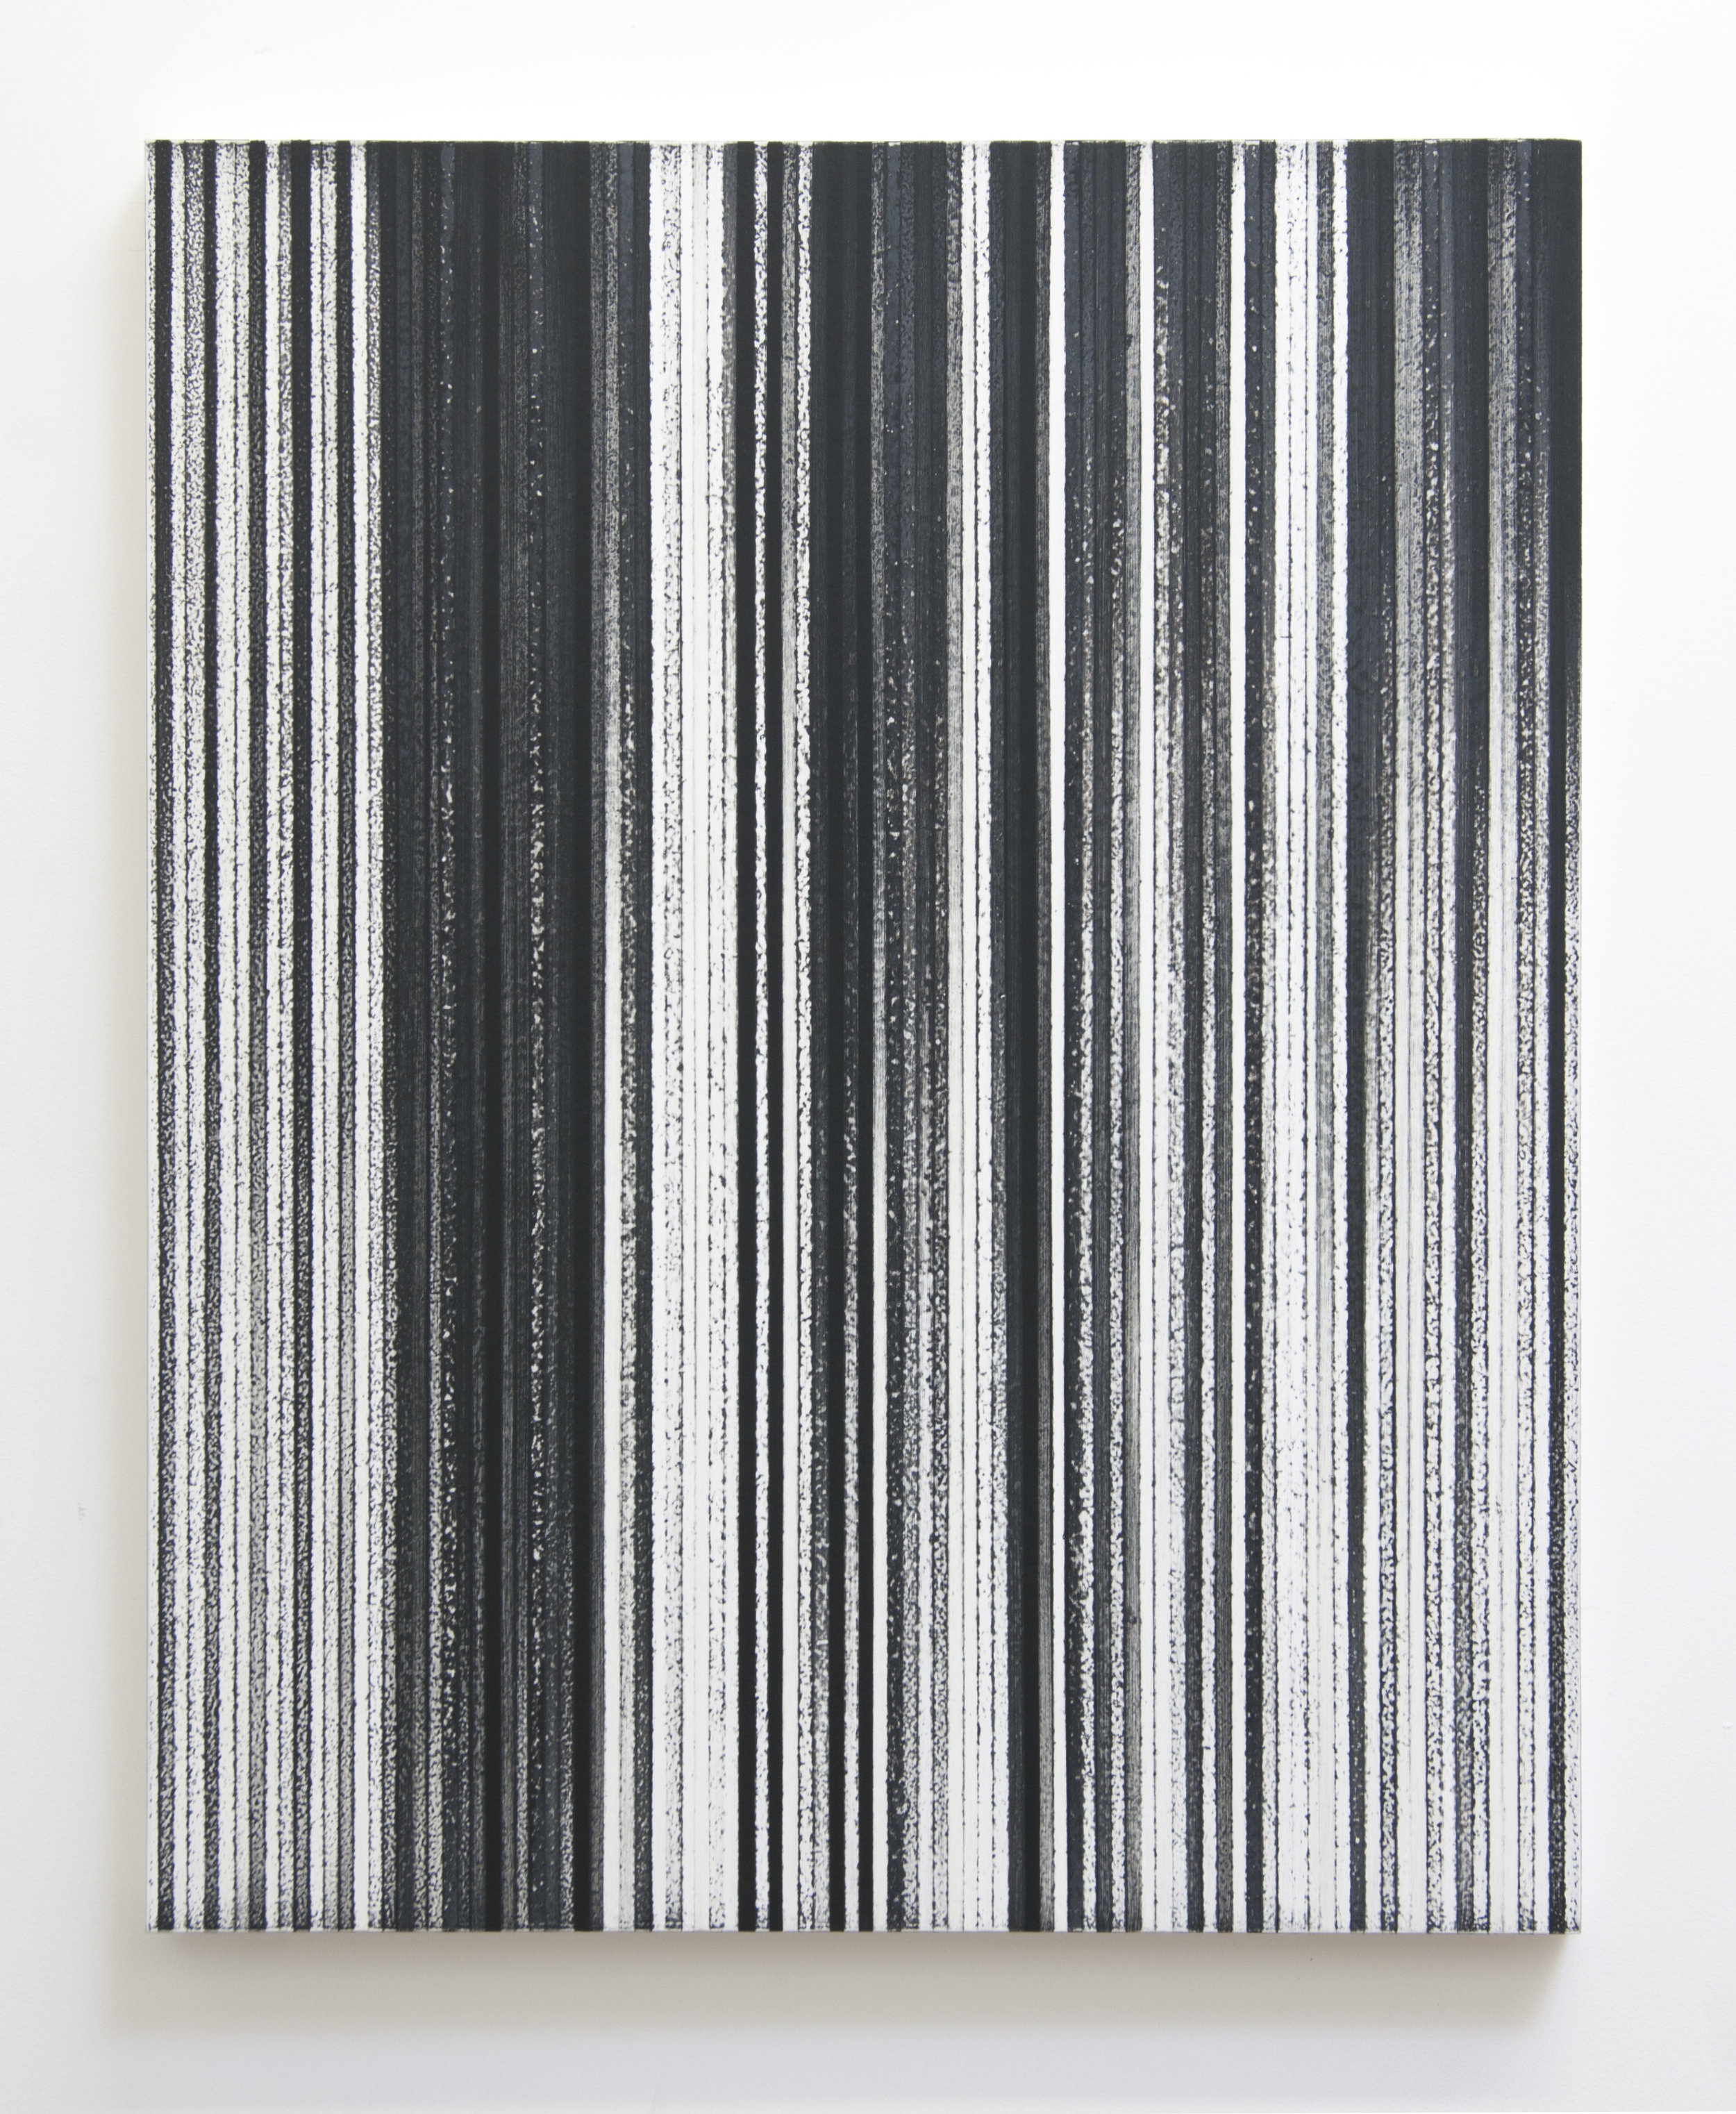  Silent Legacy, 2014  Acrylic on panel, 30 x 24 inches 